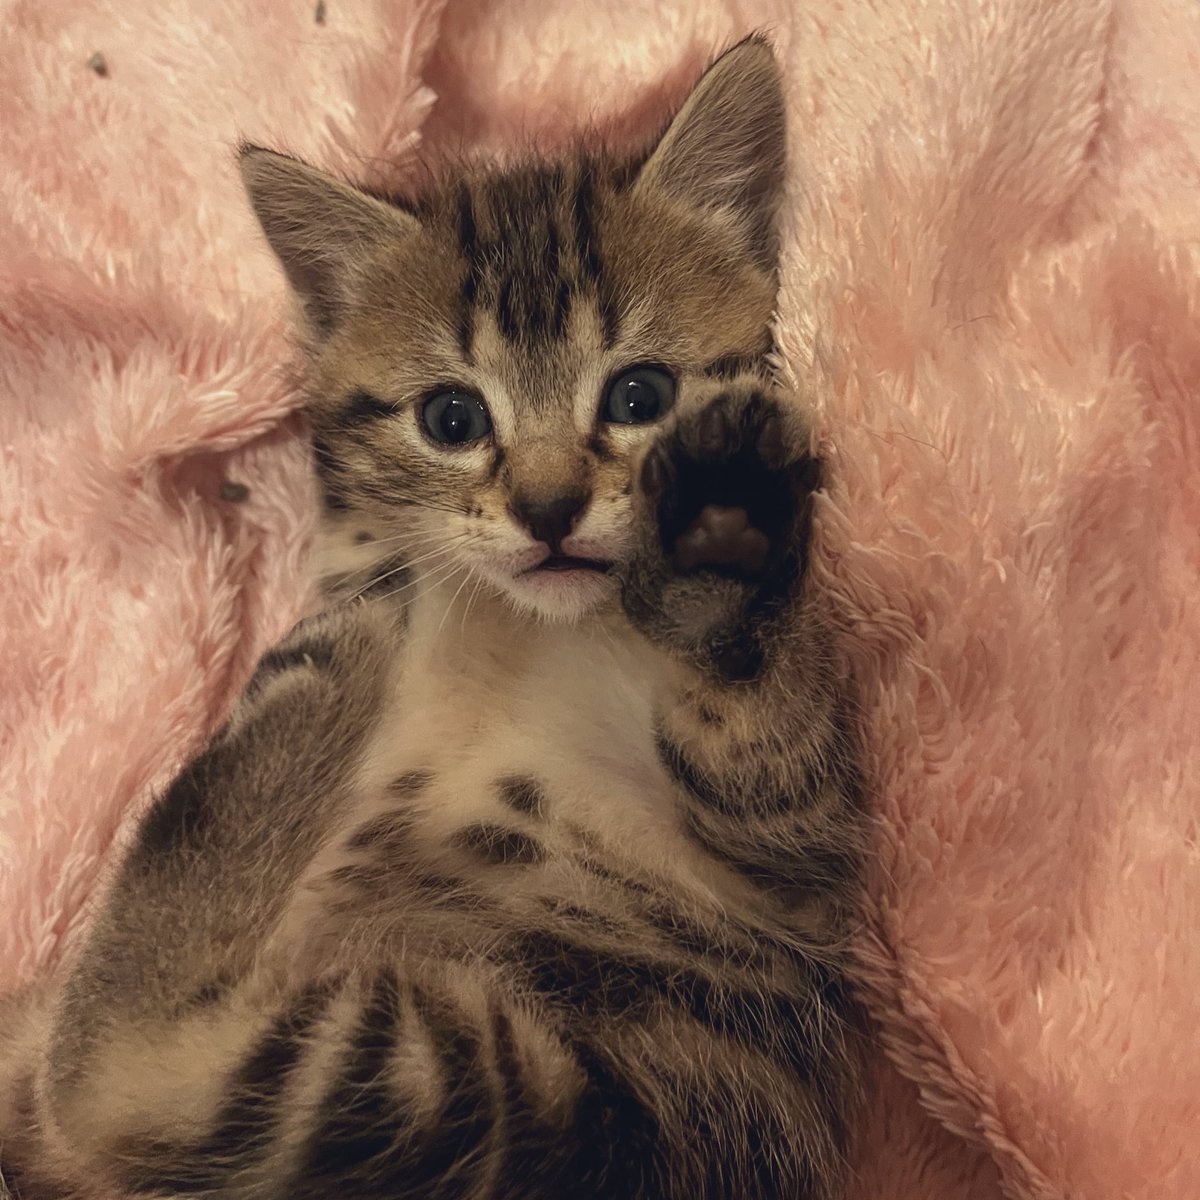 Stop right there! 🤣 #Caramel #Kittens #CatsOfTwitter #ToeBeans